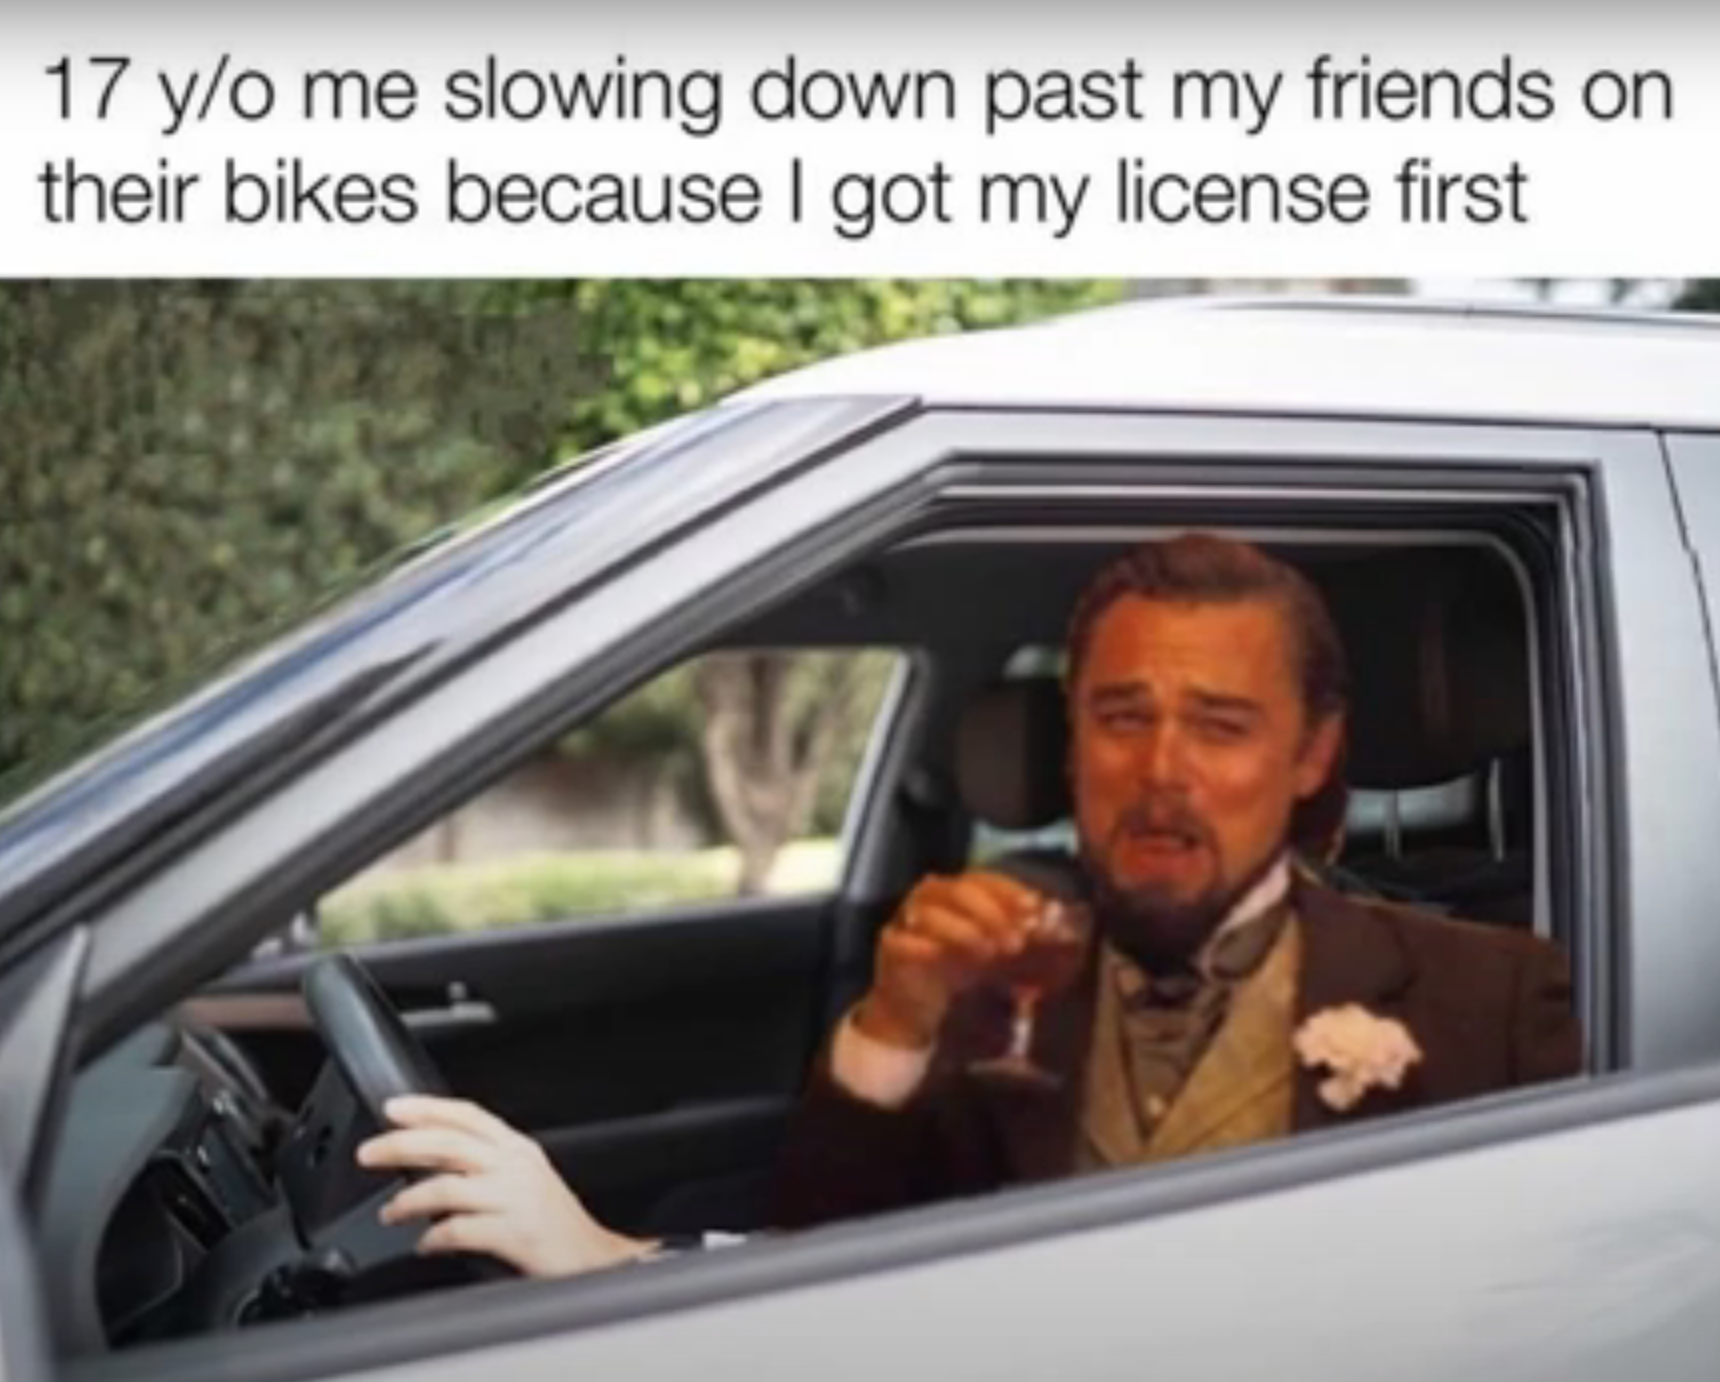 leonardo dicaprio laughing memes - vehicle door - 17 yo me slowing down past my friends on their bikes because I got my license first